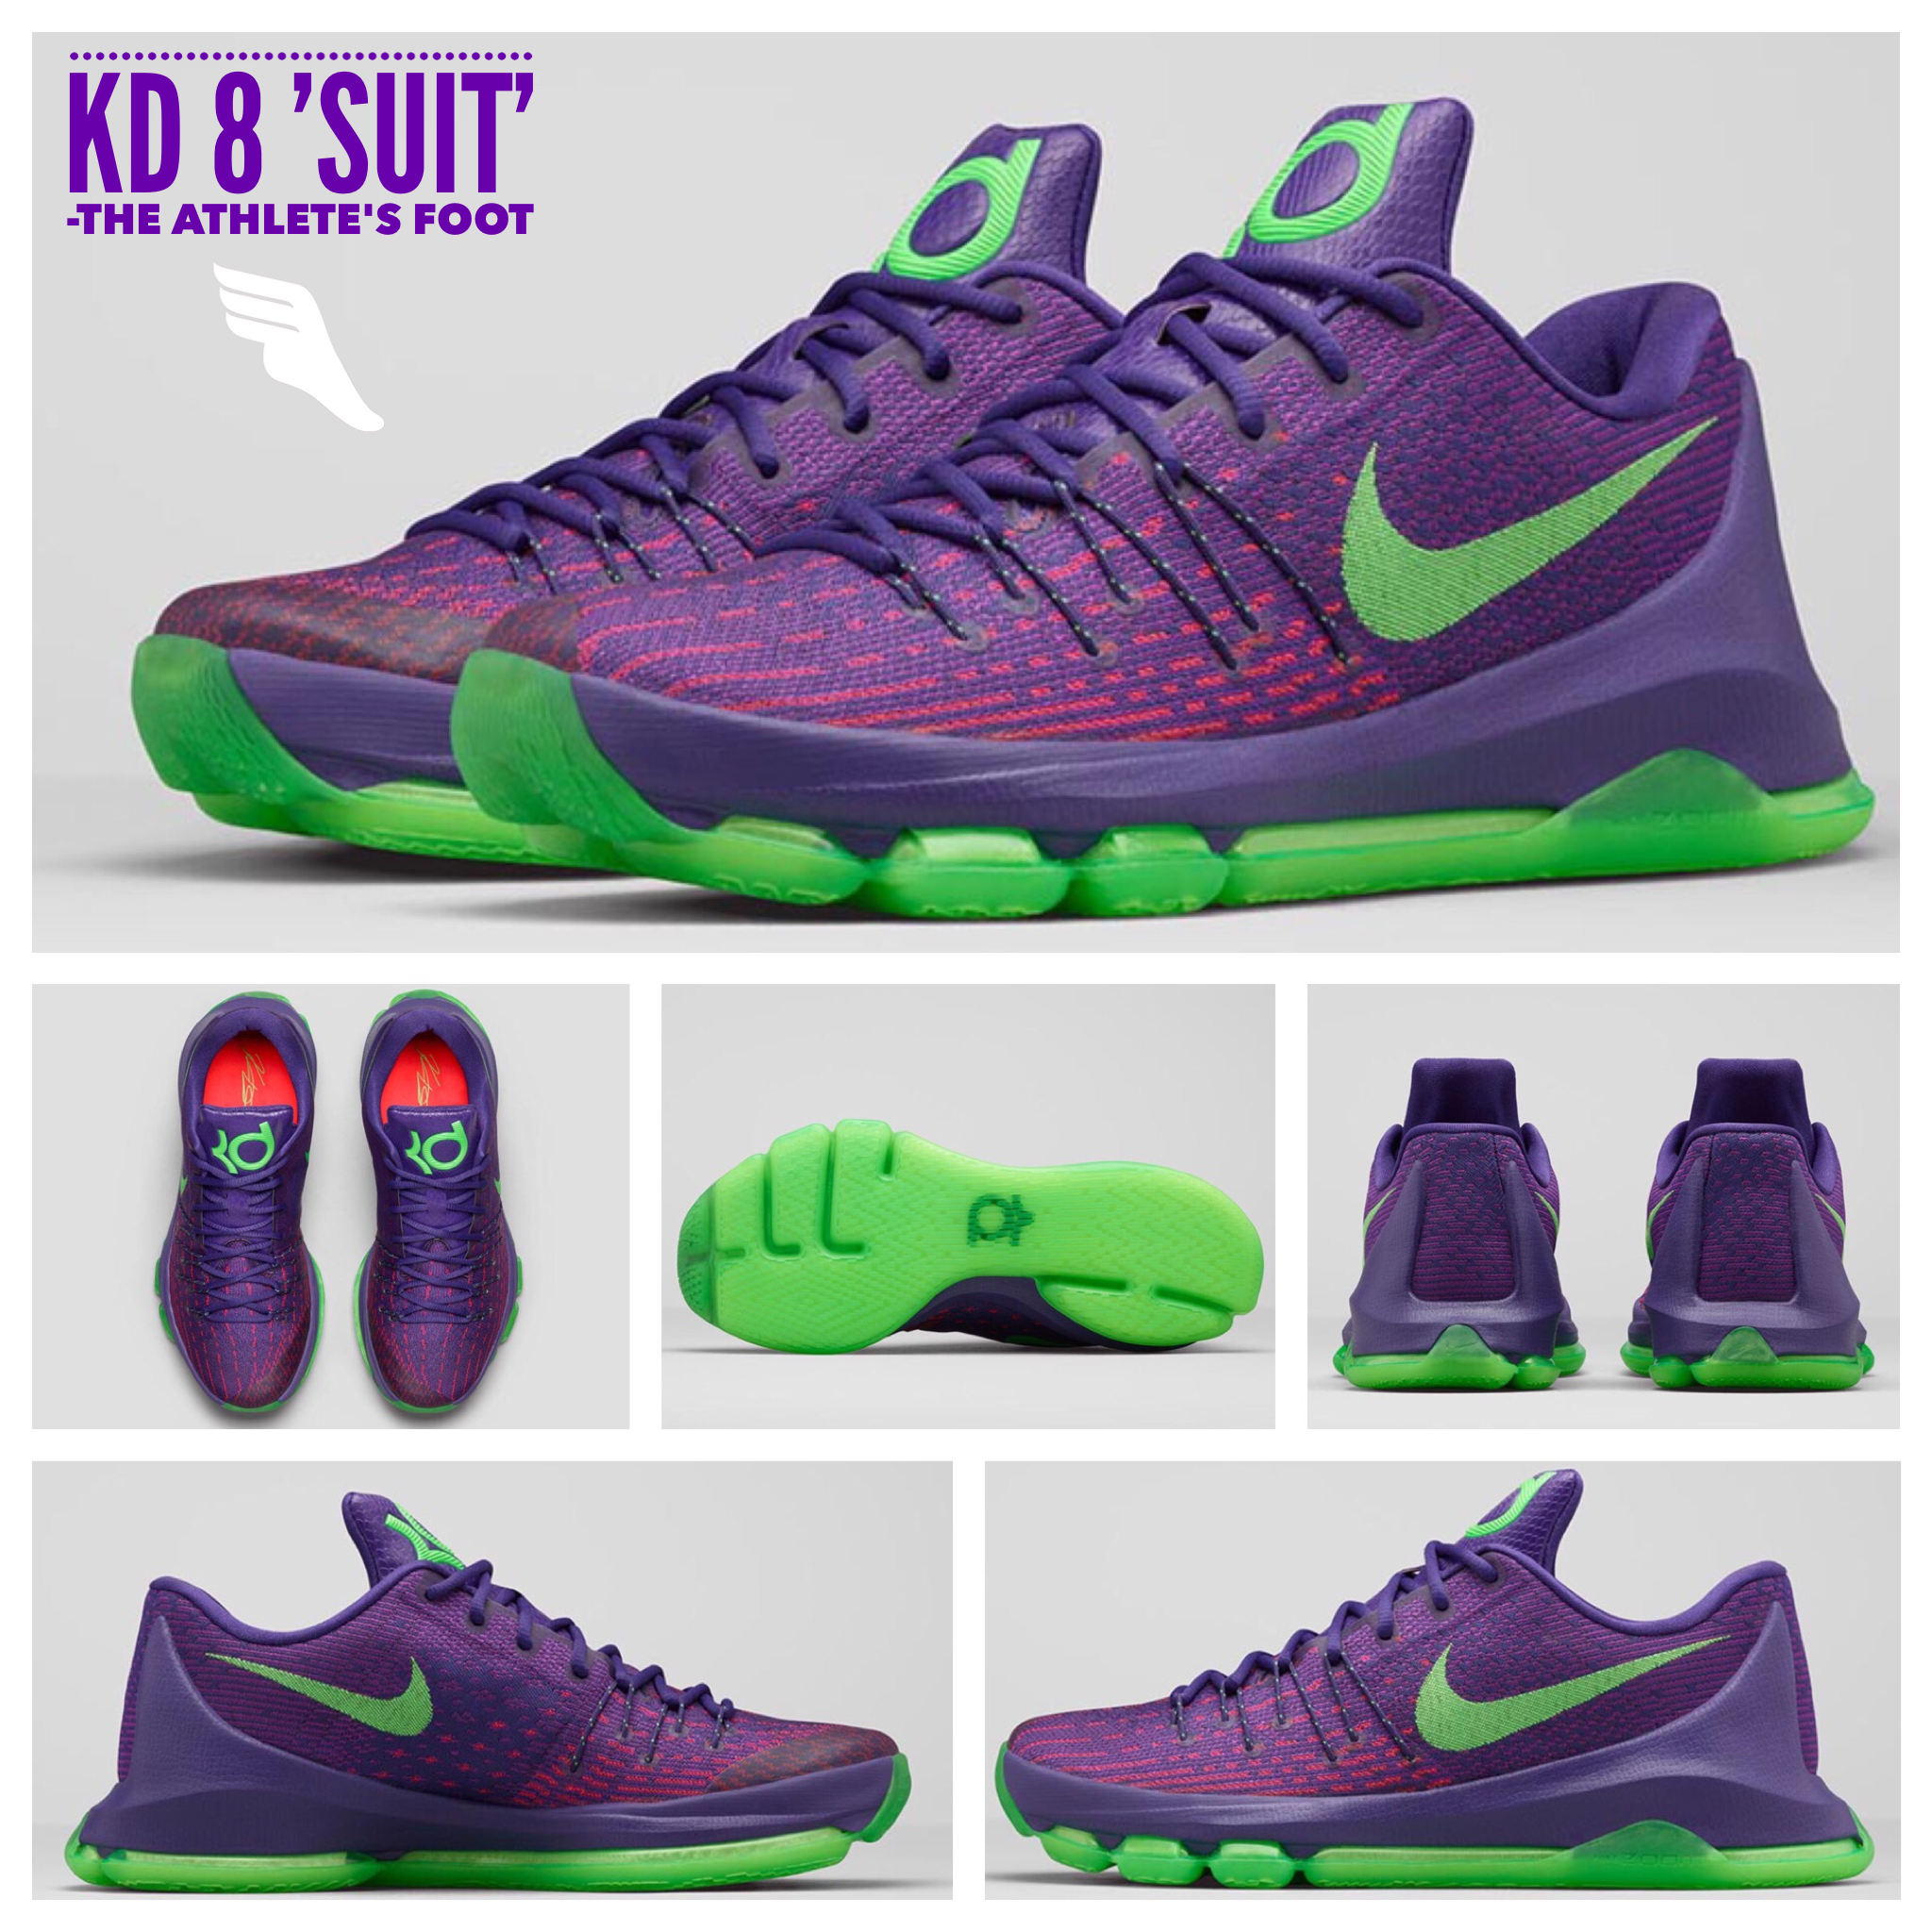 nike kd 8 suit Kevin Durant shoes on sale